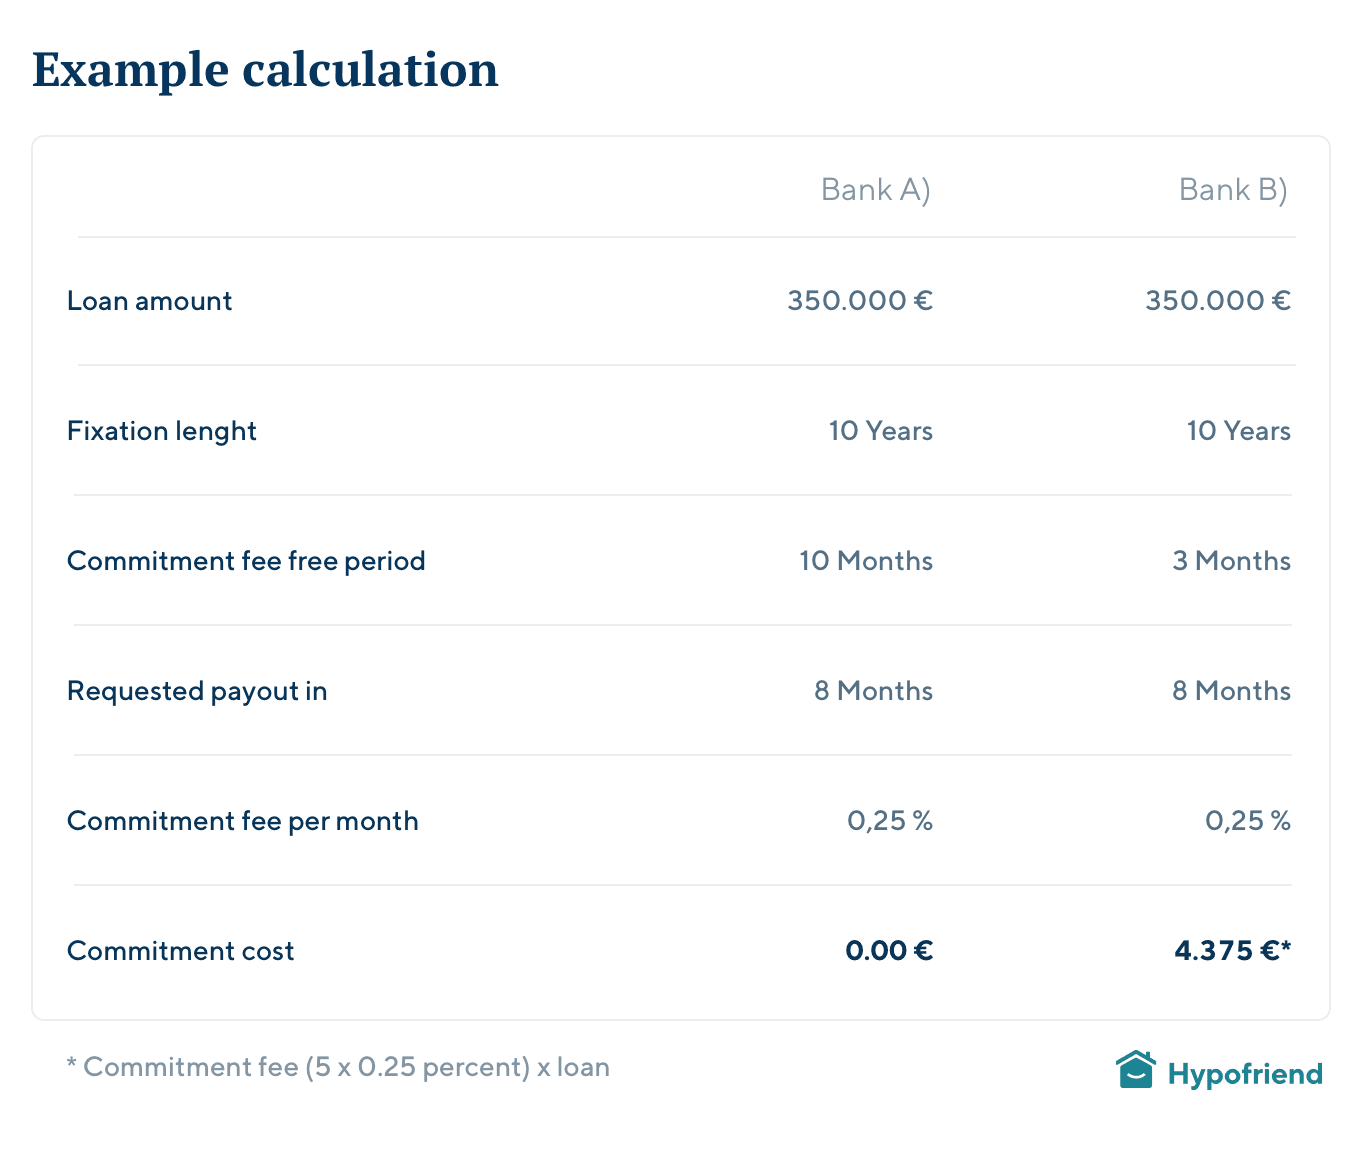 Example calculation for commitment fees